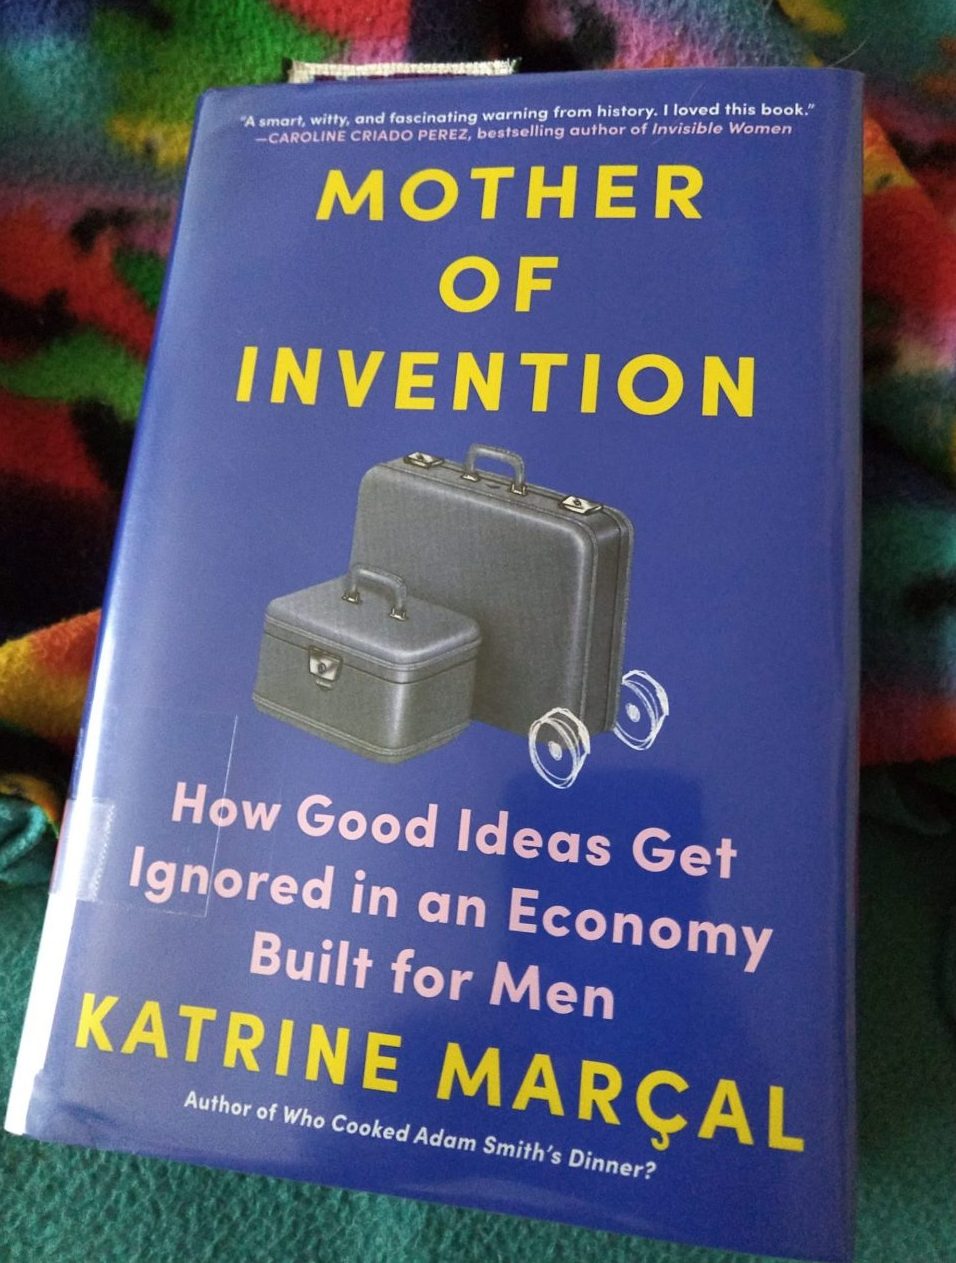 book: Mother of Invention: How Good Ideas Get Ignored in an Economy Built for Men. The cover is blue and minimalist, featuring a mid-century style suitcase